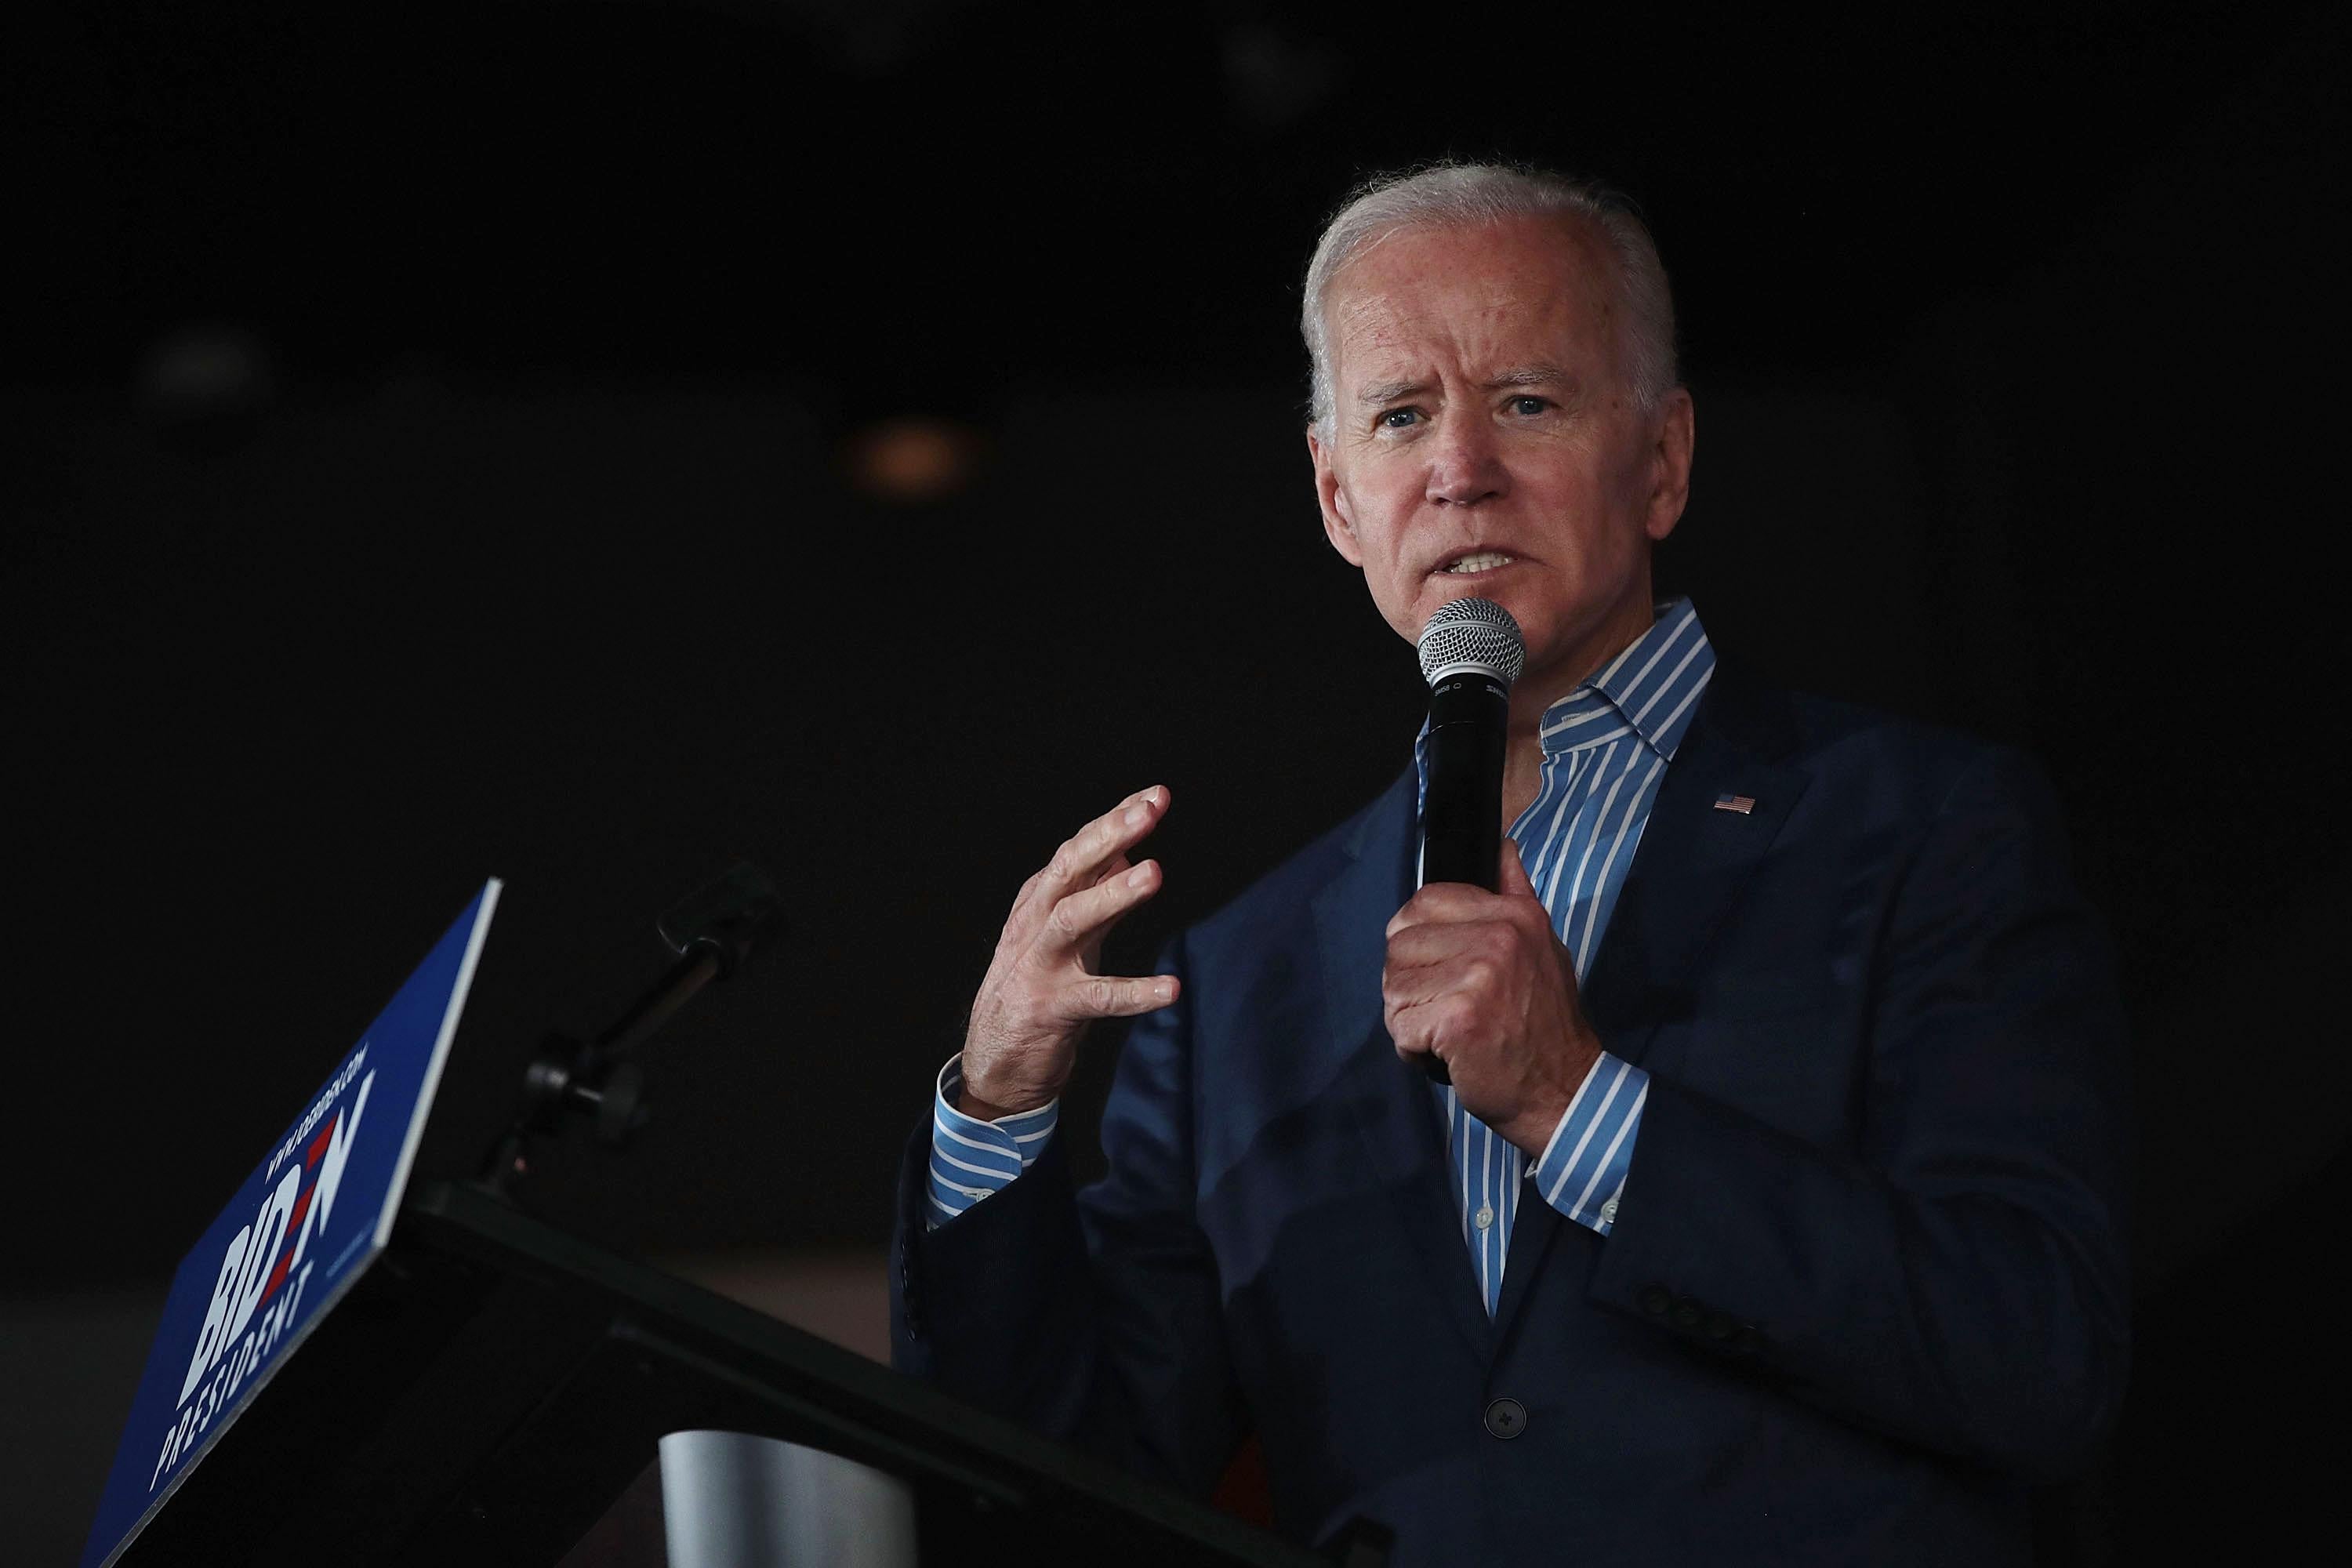 Joe Biden speaks during a campaign event at the Big Grove Brewery and Taproom on Wednesday in Iowa City.